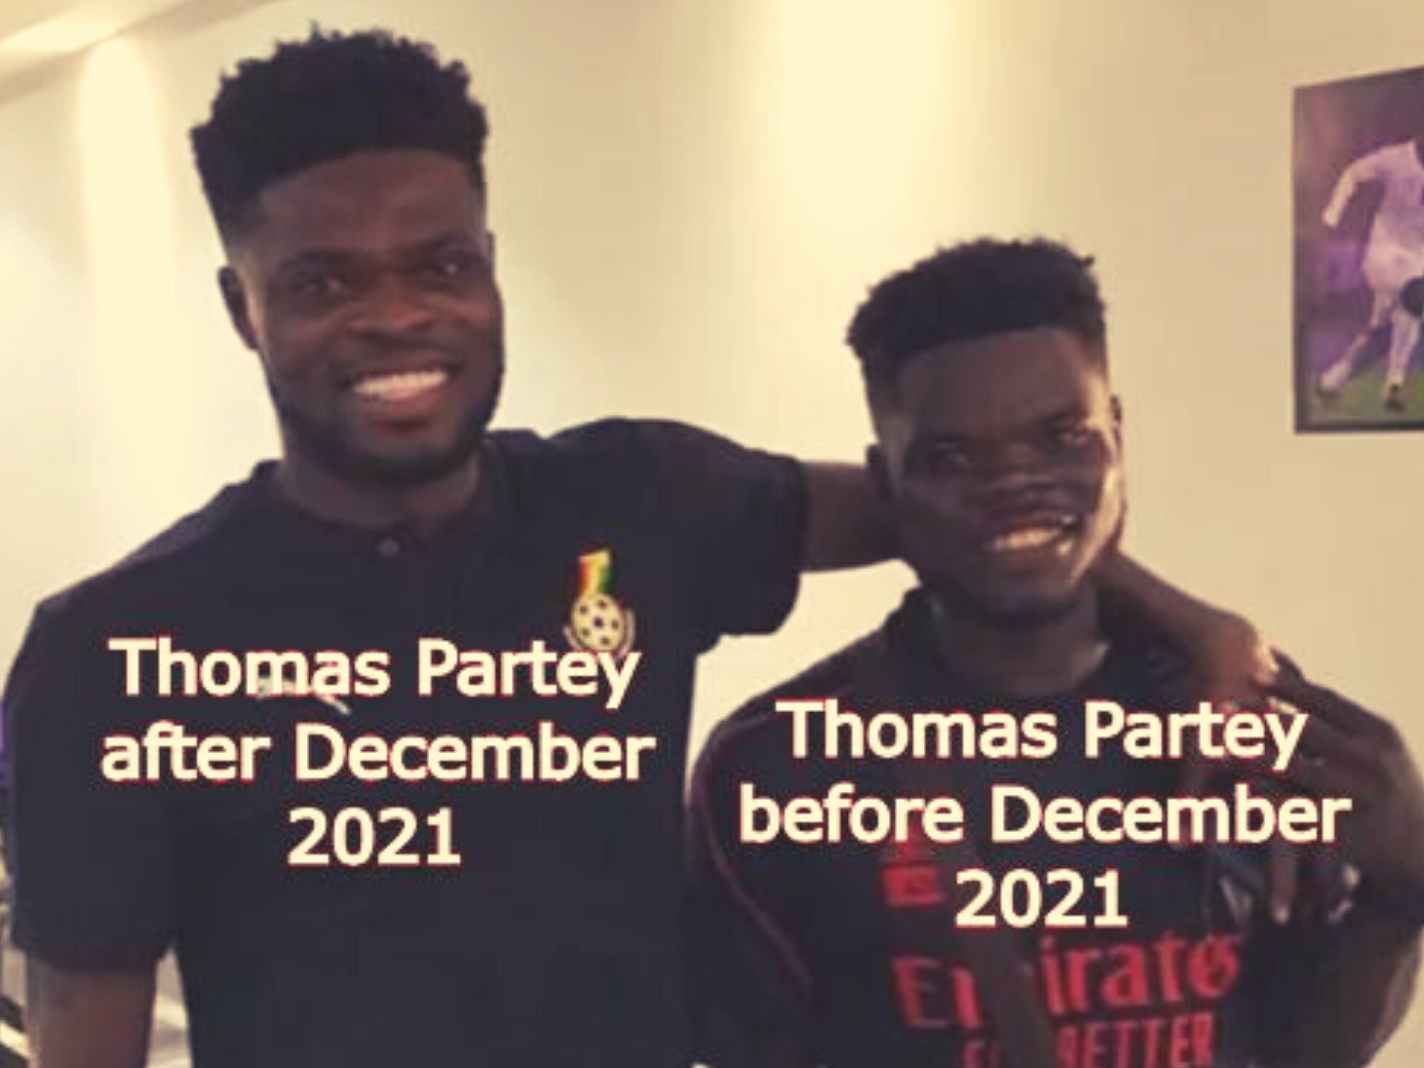 Thomas Partey has a lookalike who measures up in everything but height